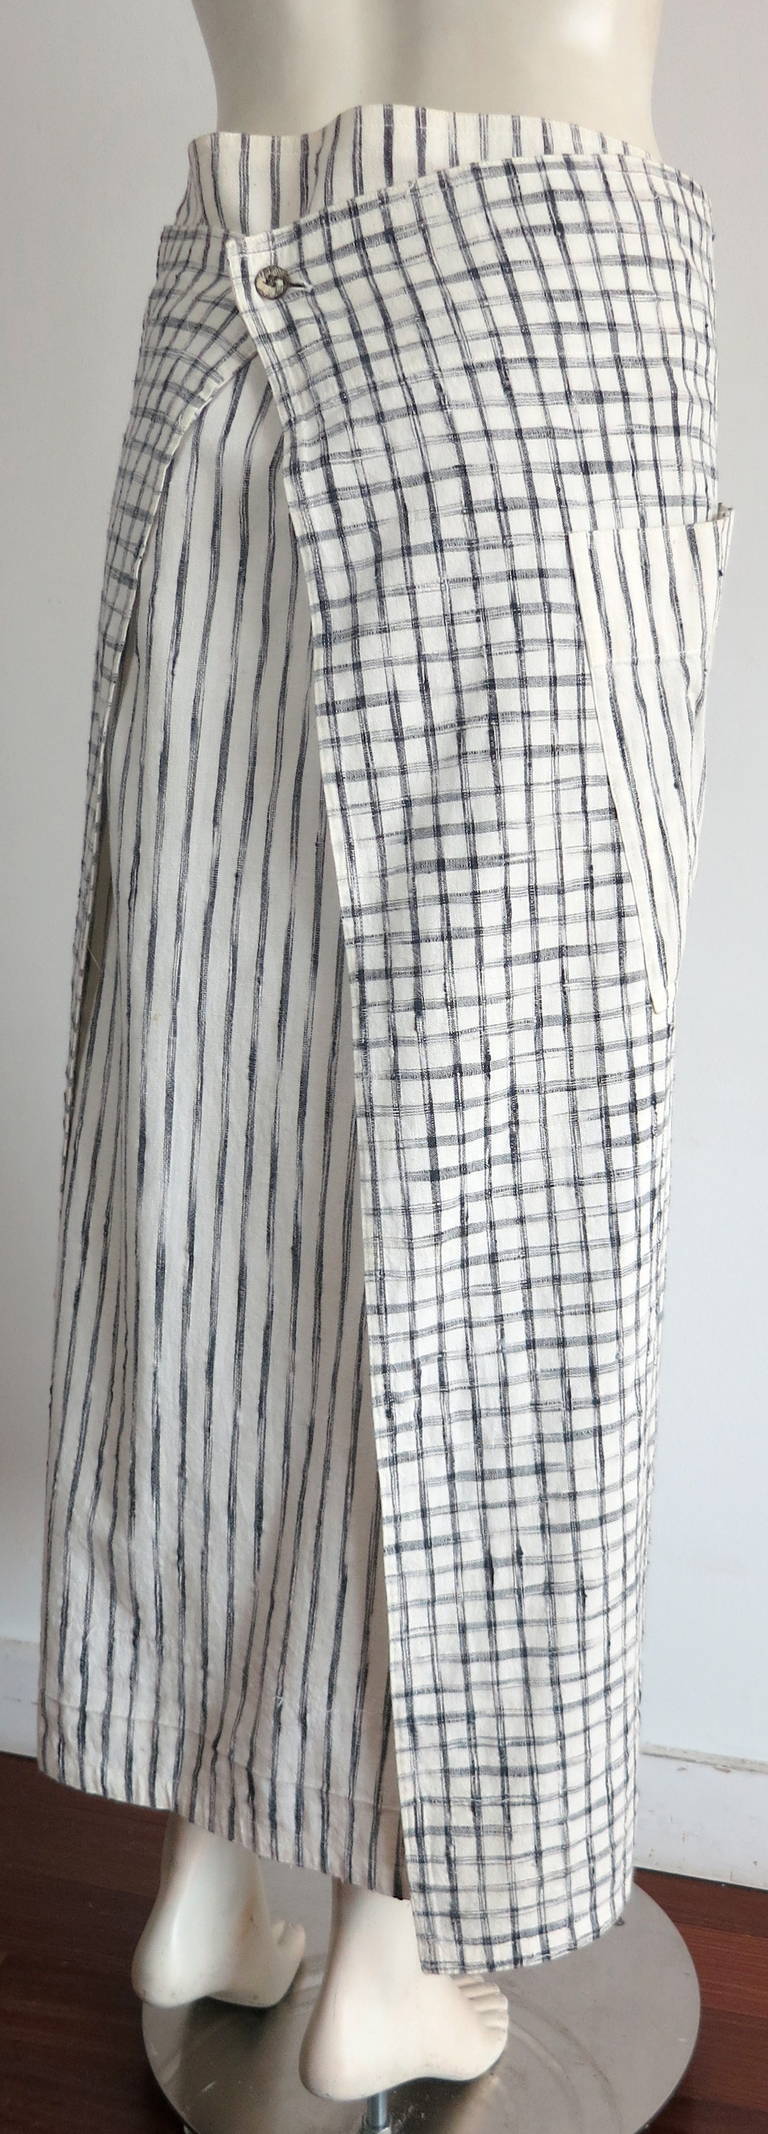 1980's ISSEY MIYAKE Woven ikat 2pc. skirt set For Sale 2